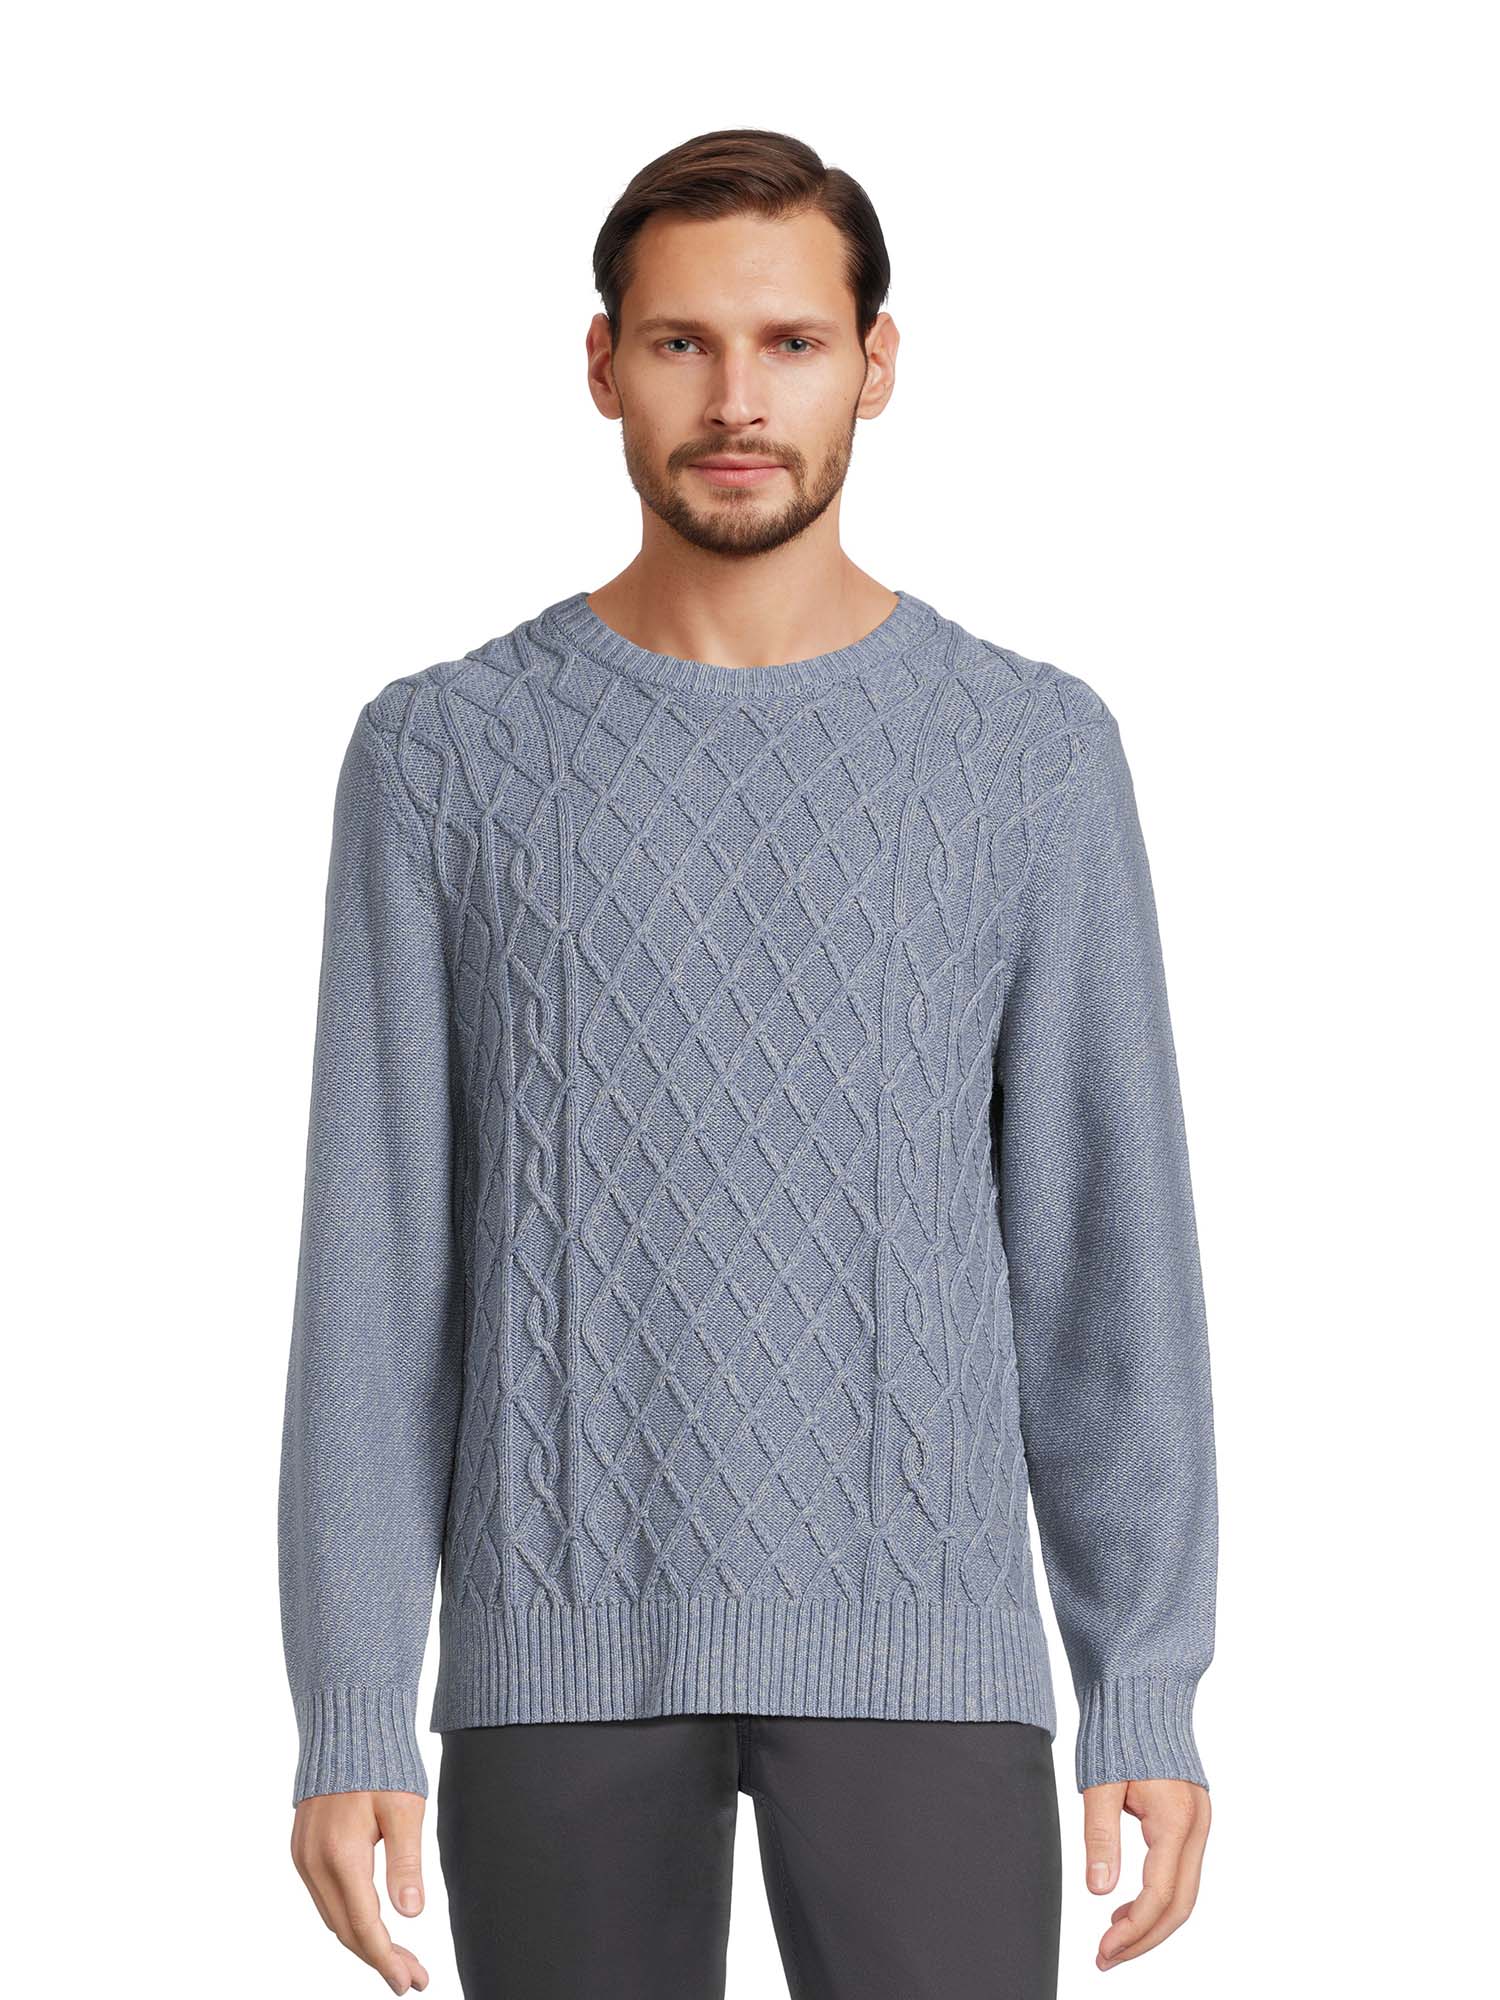 George Men's Marled Sweater with Long Sleeves, Sizes S-3XL - image 1 of 5